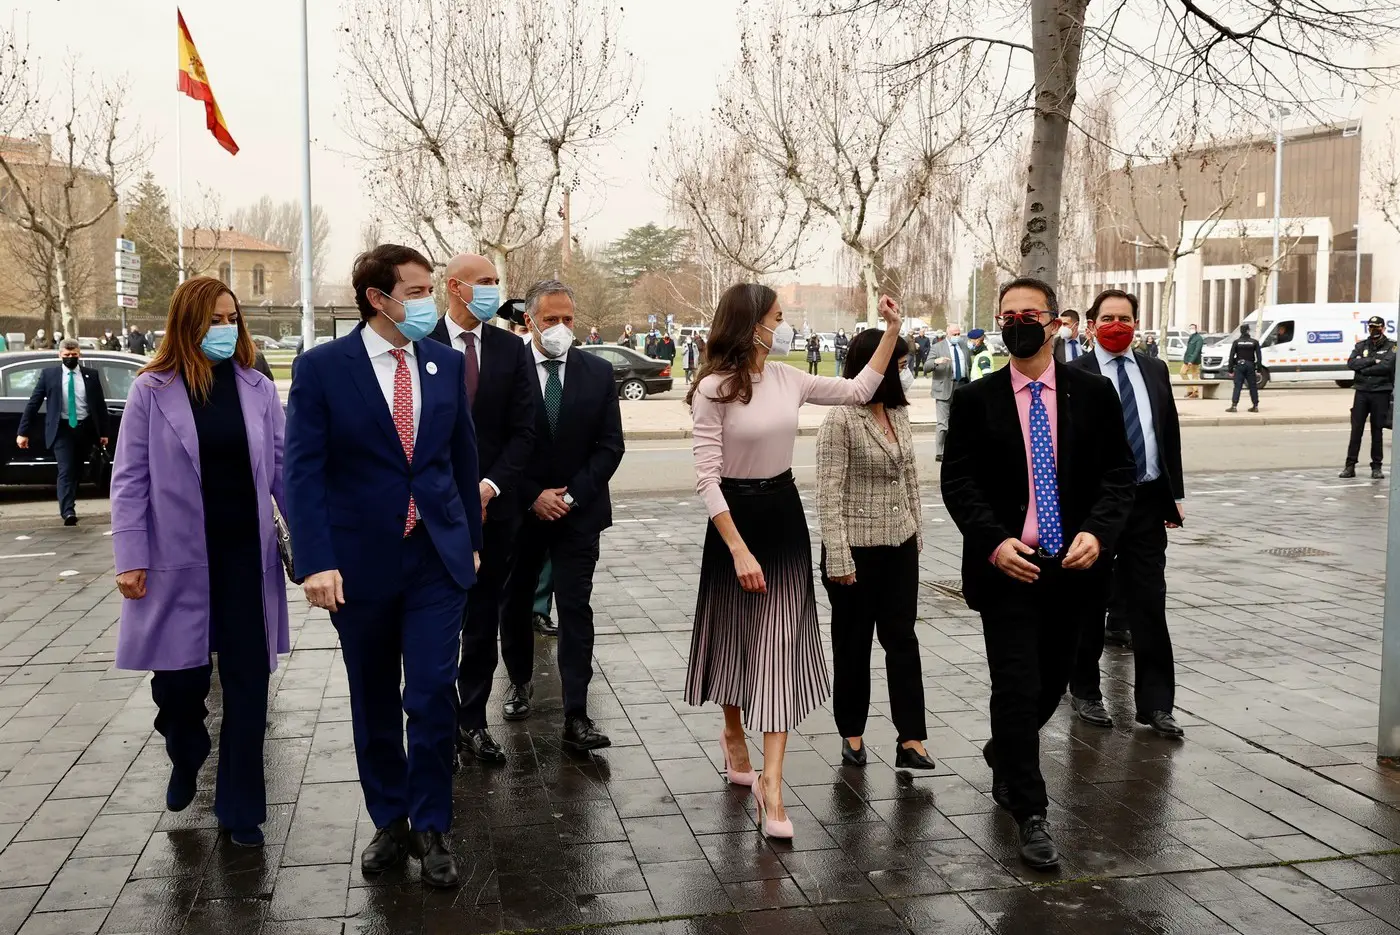 Queen Letizia attended the "World Day of Rare Diseases" event